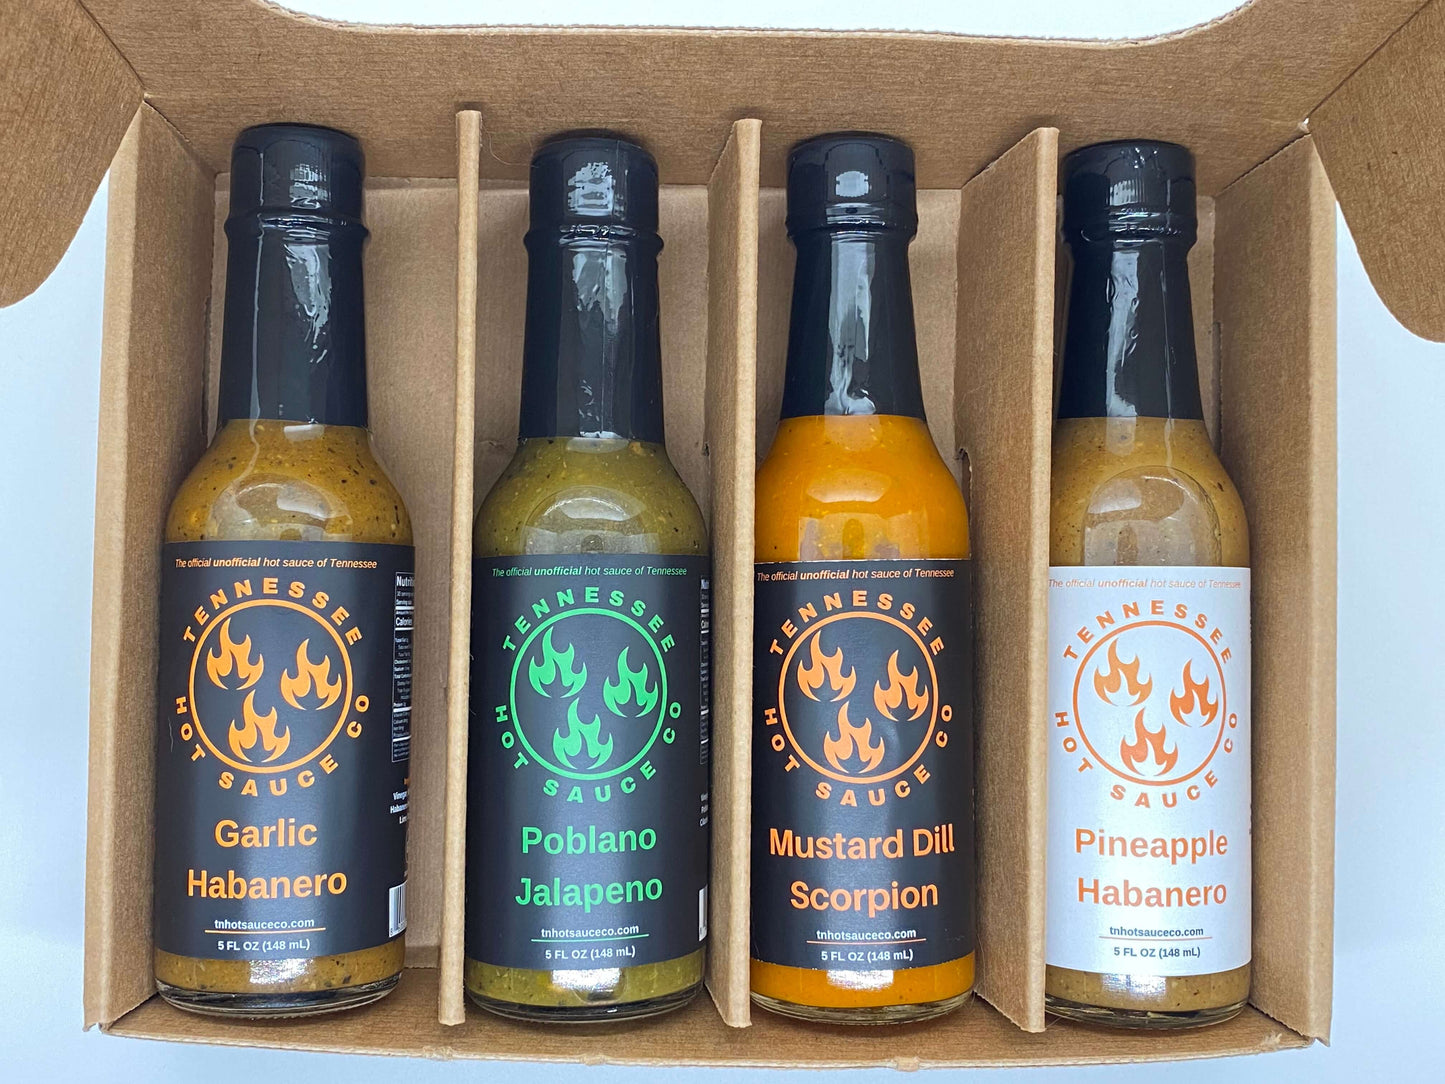 4 Bottle Subscription- One Year Option